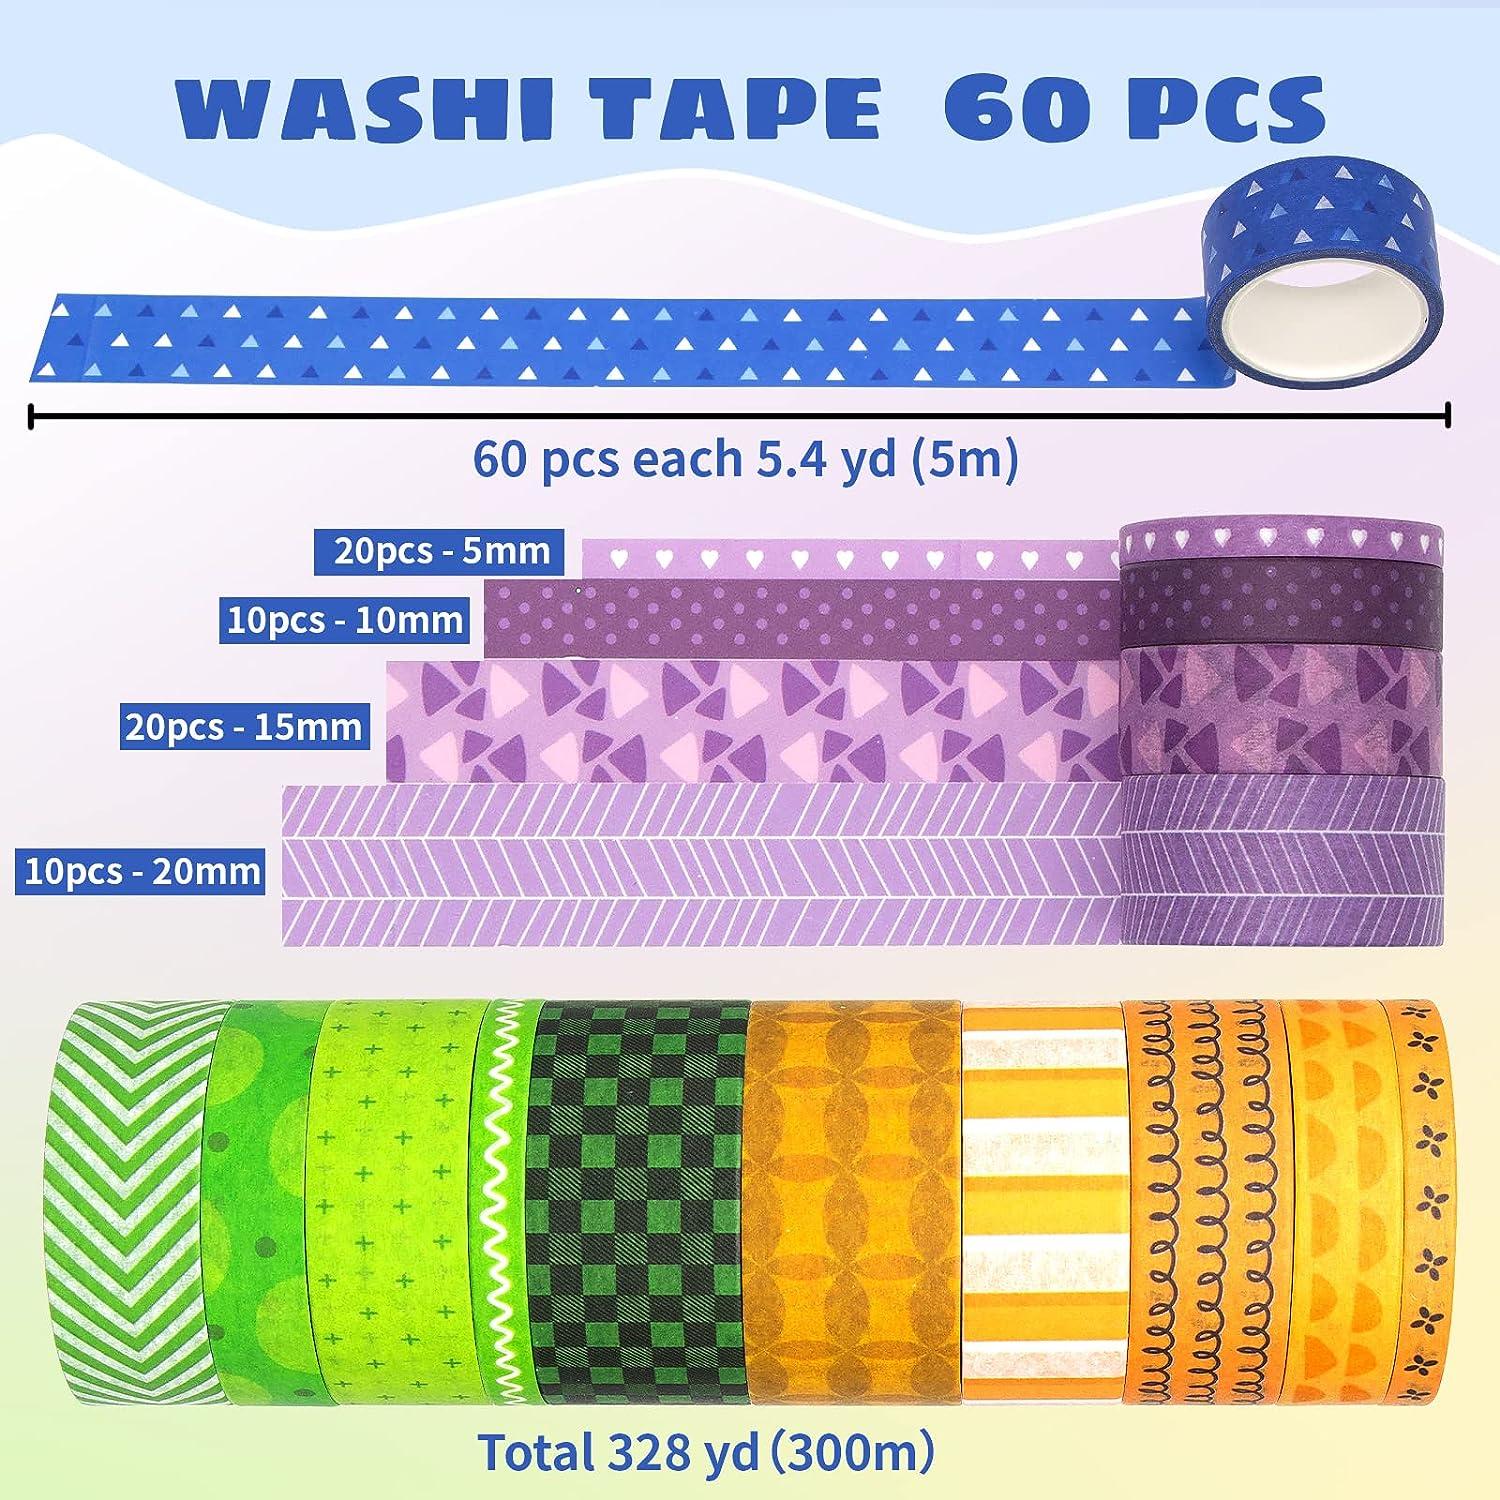 KOVANO 60 Rolls Washi Tape Set - Decorative Adhesive Masking Tape for  Scrapbooking Supplies, DIY Crafts, Bullet Journals, Gift Wrapping, Party  Decorations and Planners, Each Roll 5.4yd Total 328yd